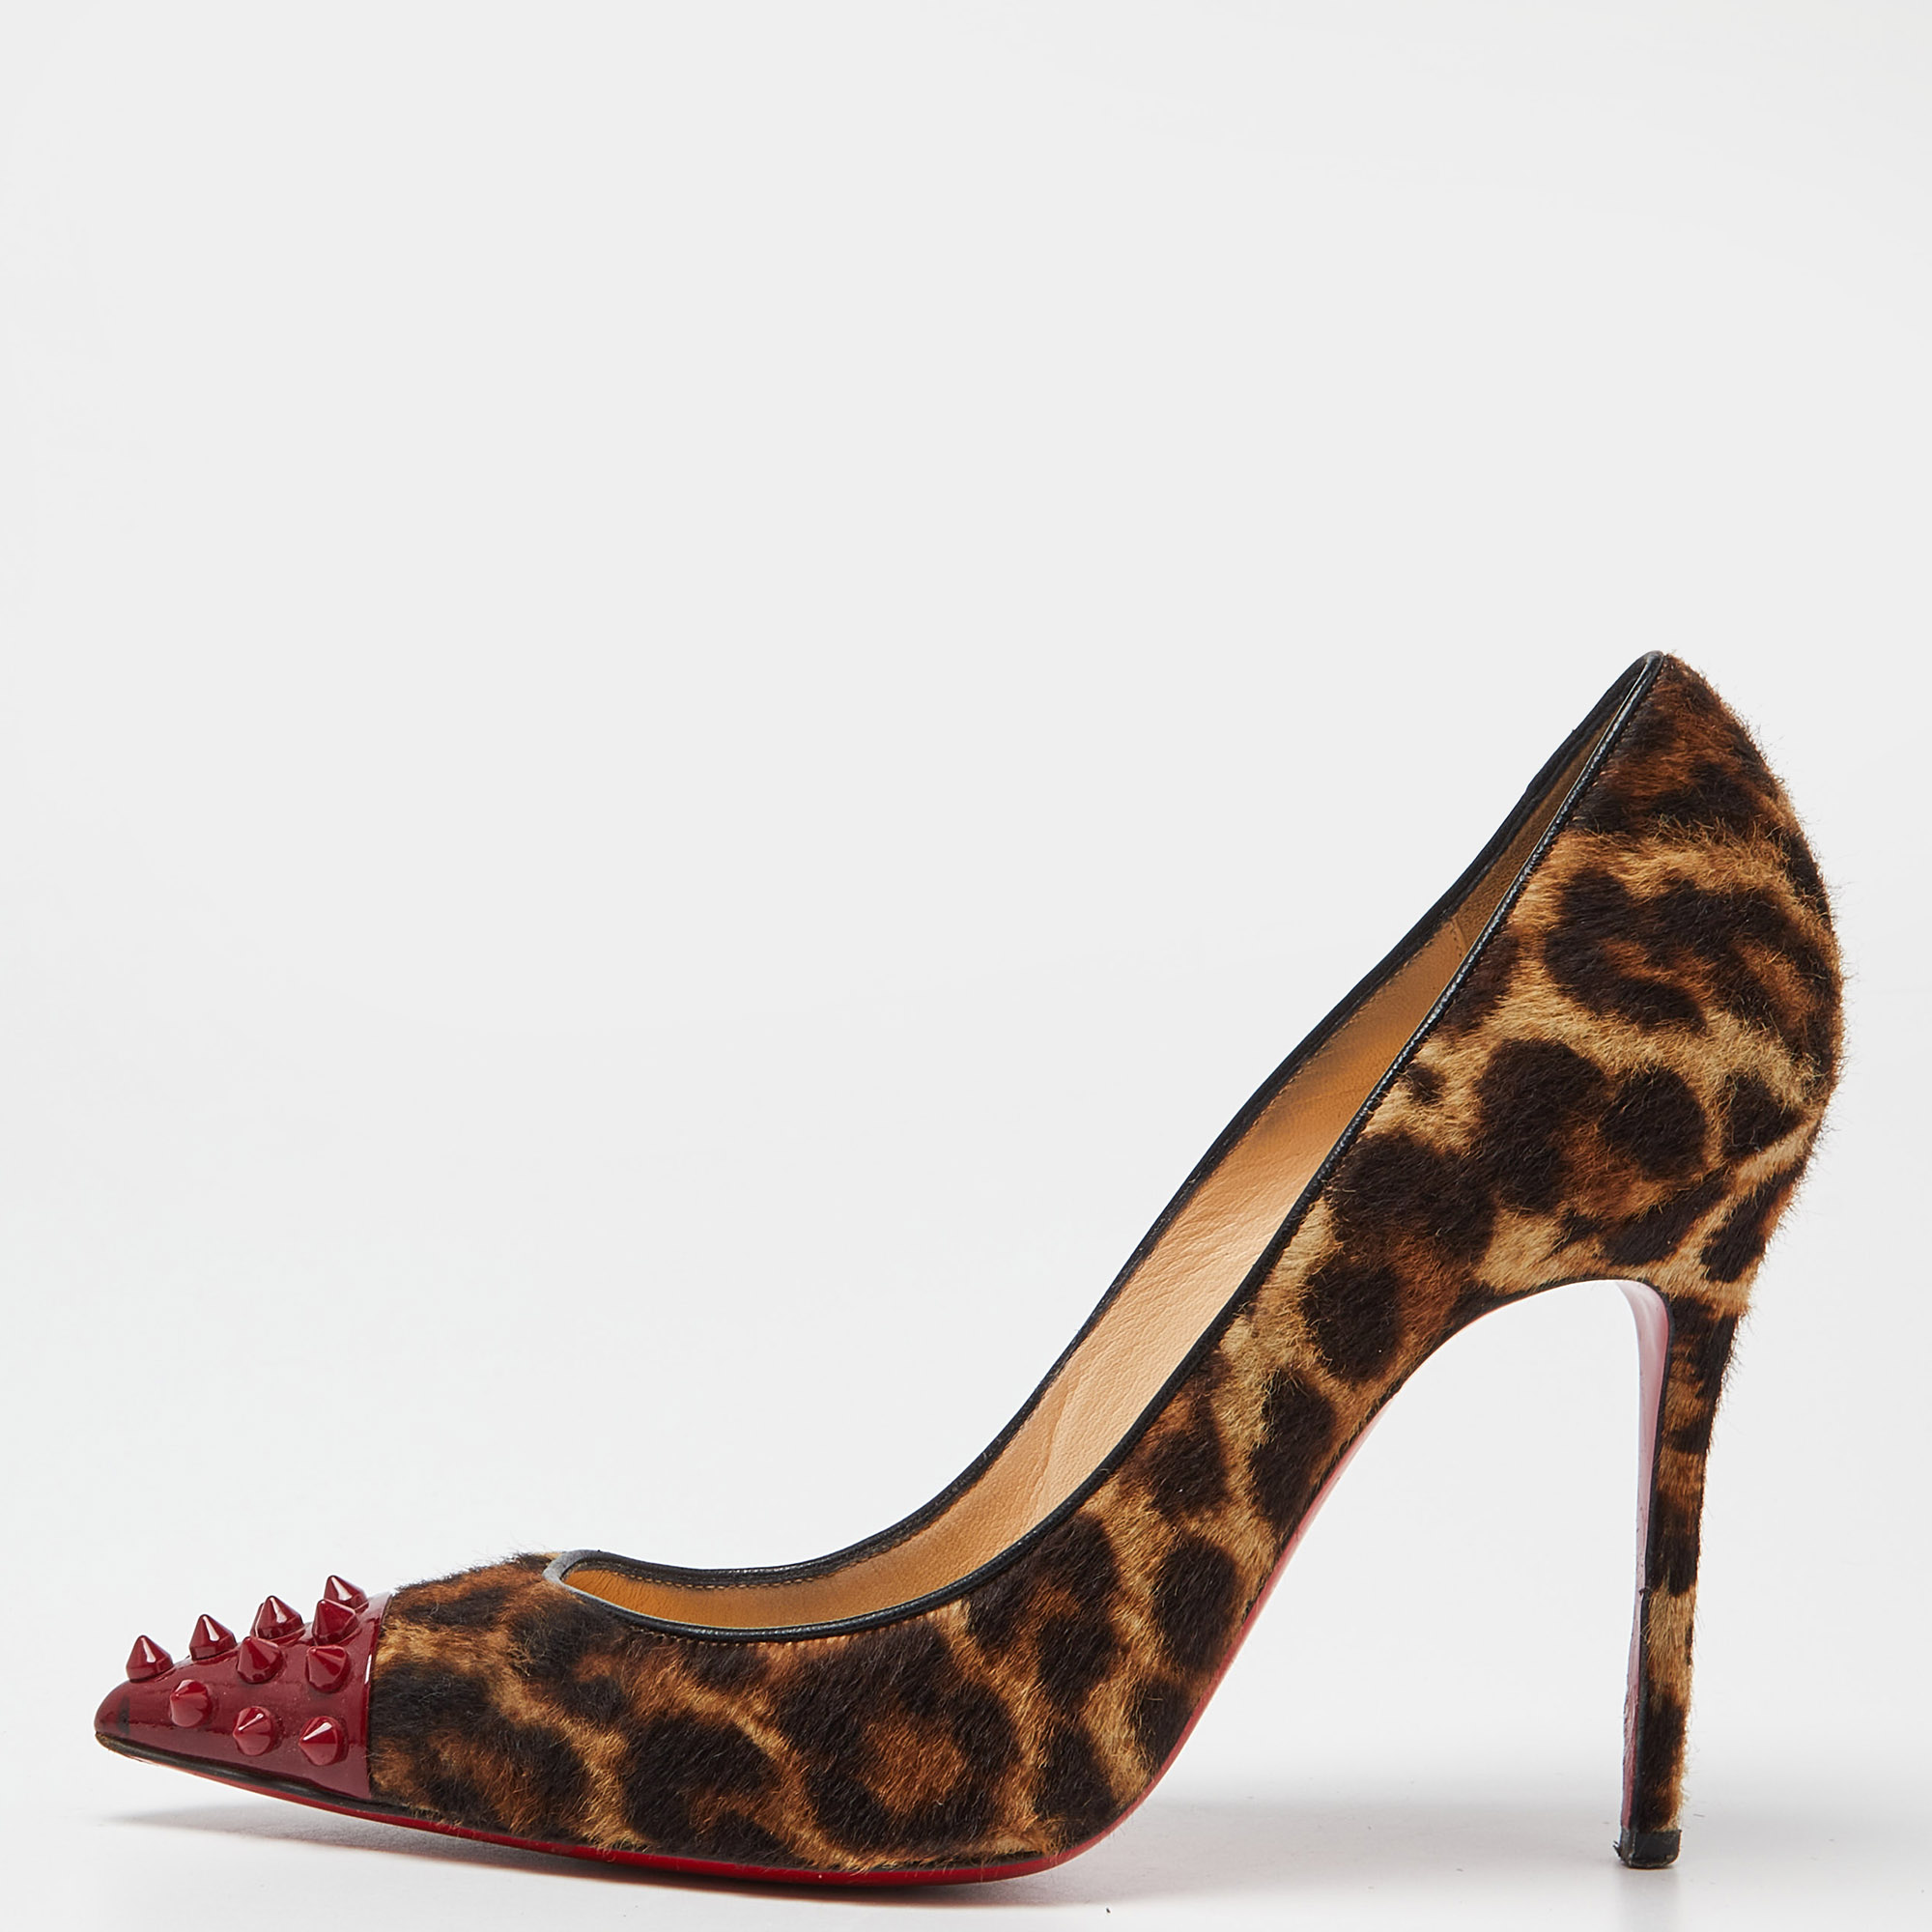 Christian louboutin brown/red leopard print calfhair geo spike studded cap toe pumps size 37